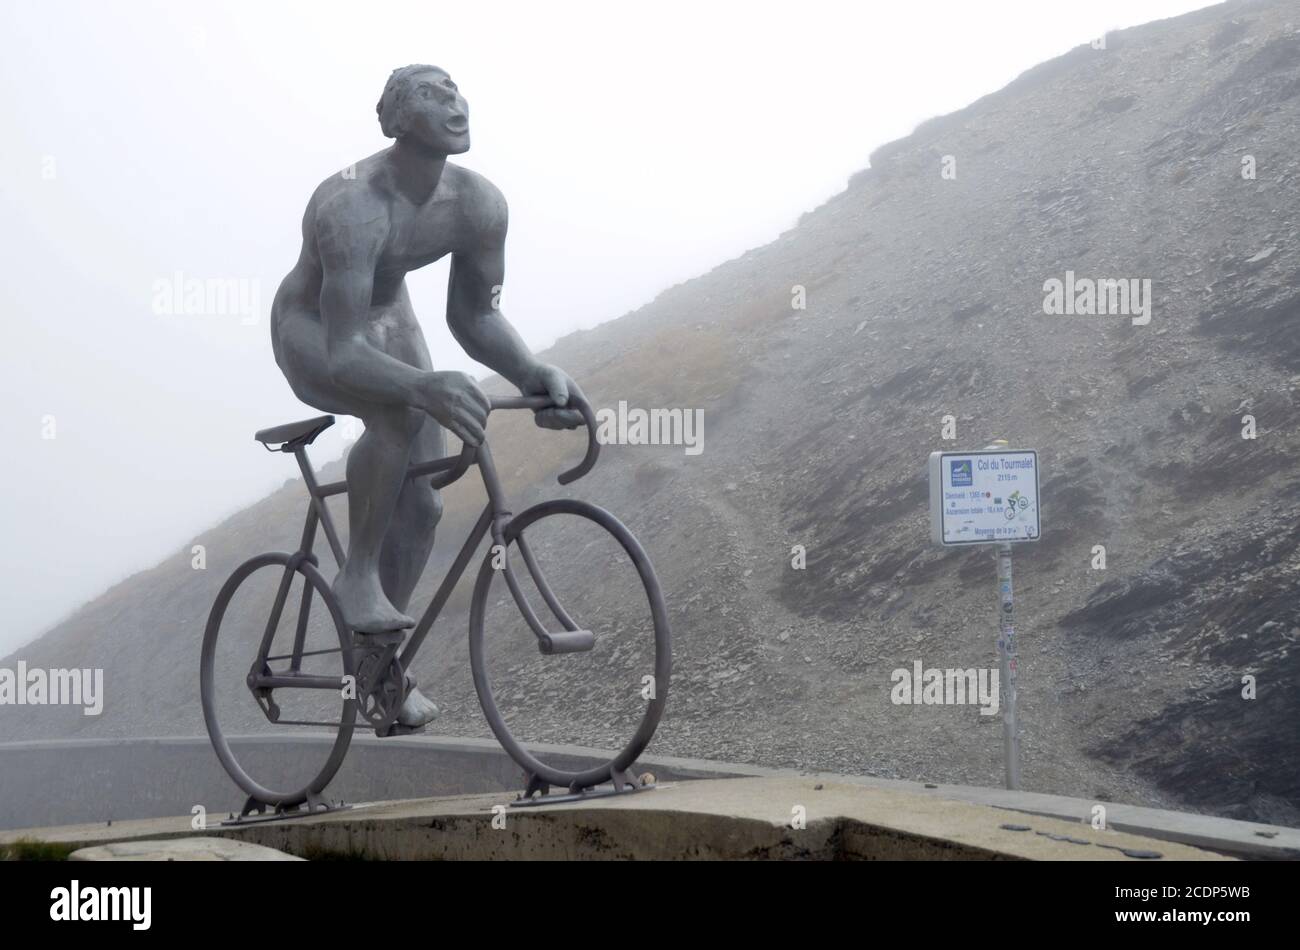 The top of the col du Tourmalet in the Pyrenees mountains range (2115m), southern France. A work of art pays tribute to the Tour de France cyclists. Stock Photo